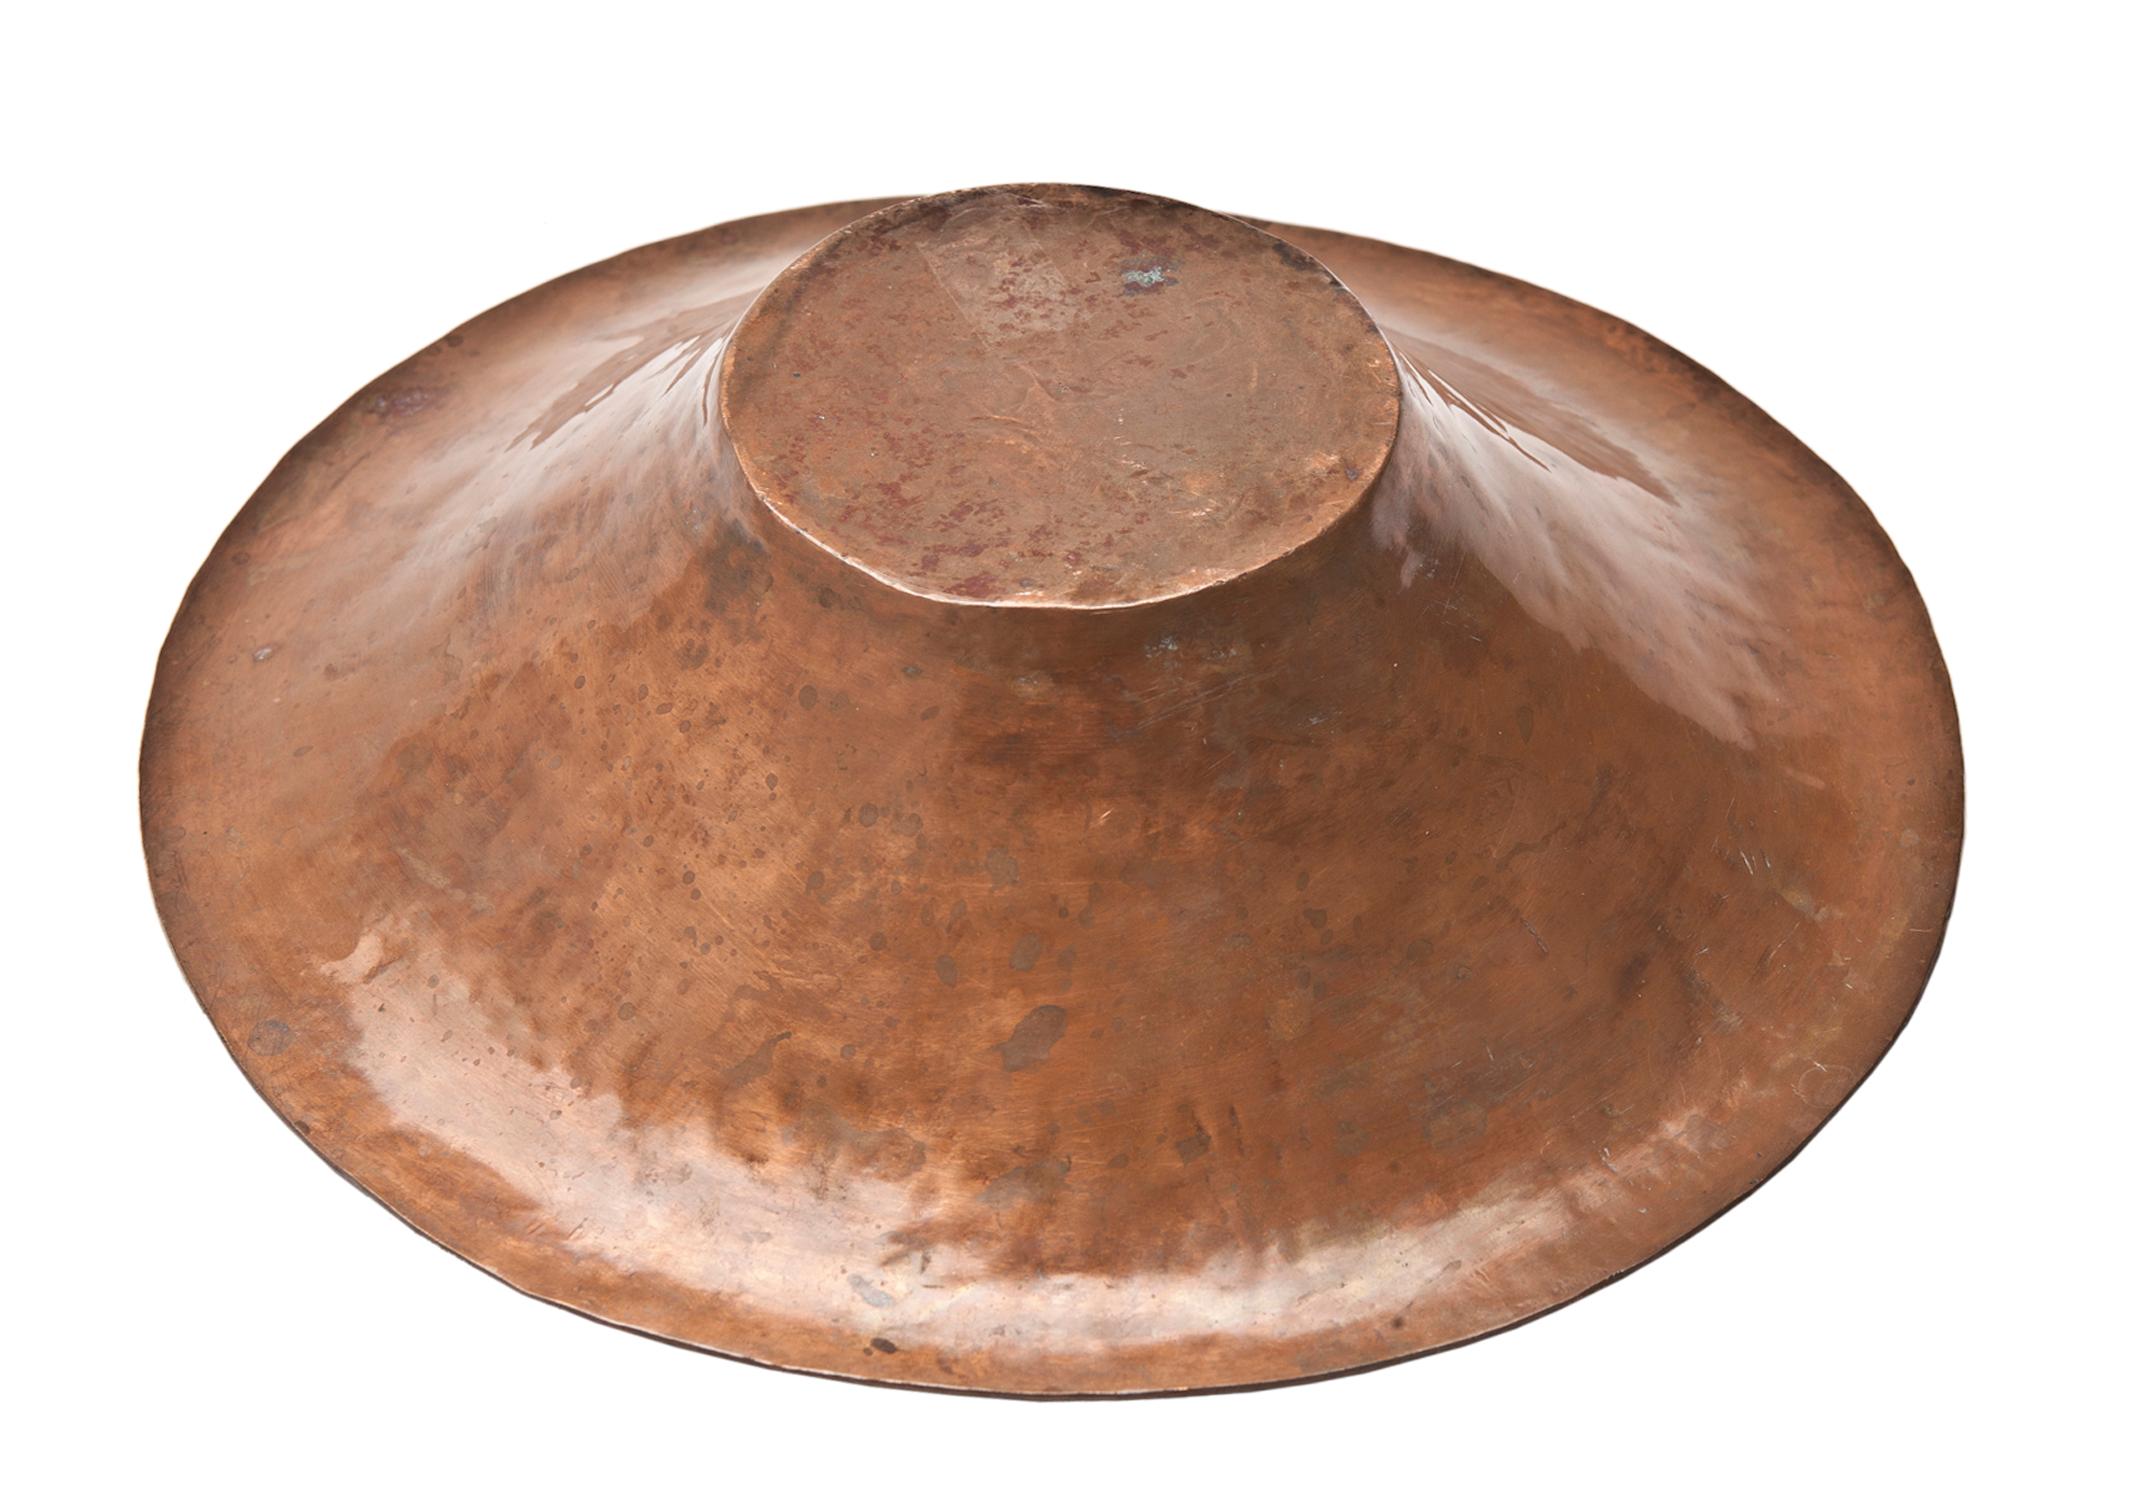 Hand Hammered Arts & Crafts Solid Copper Bowl. Stunning example of original Craftsman/Mission style; circa early 1900's.
The base is approximately 2 7/8